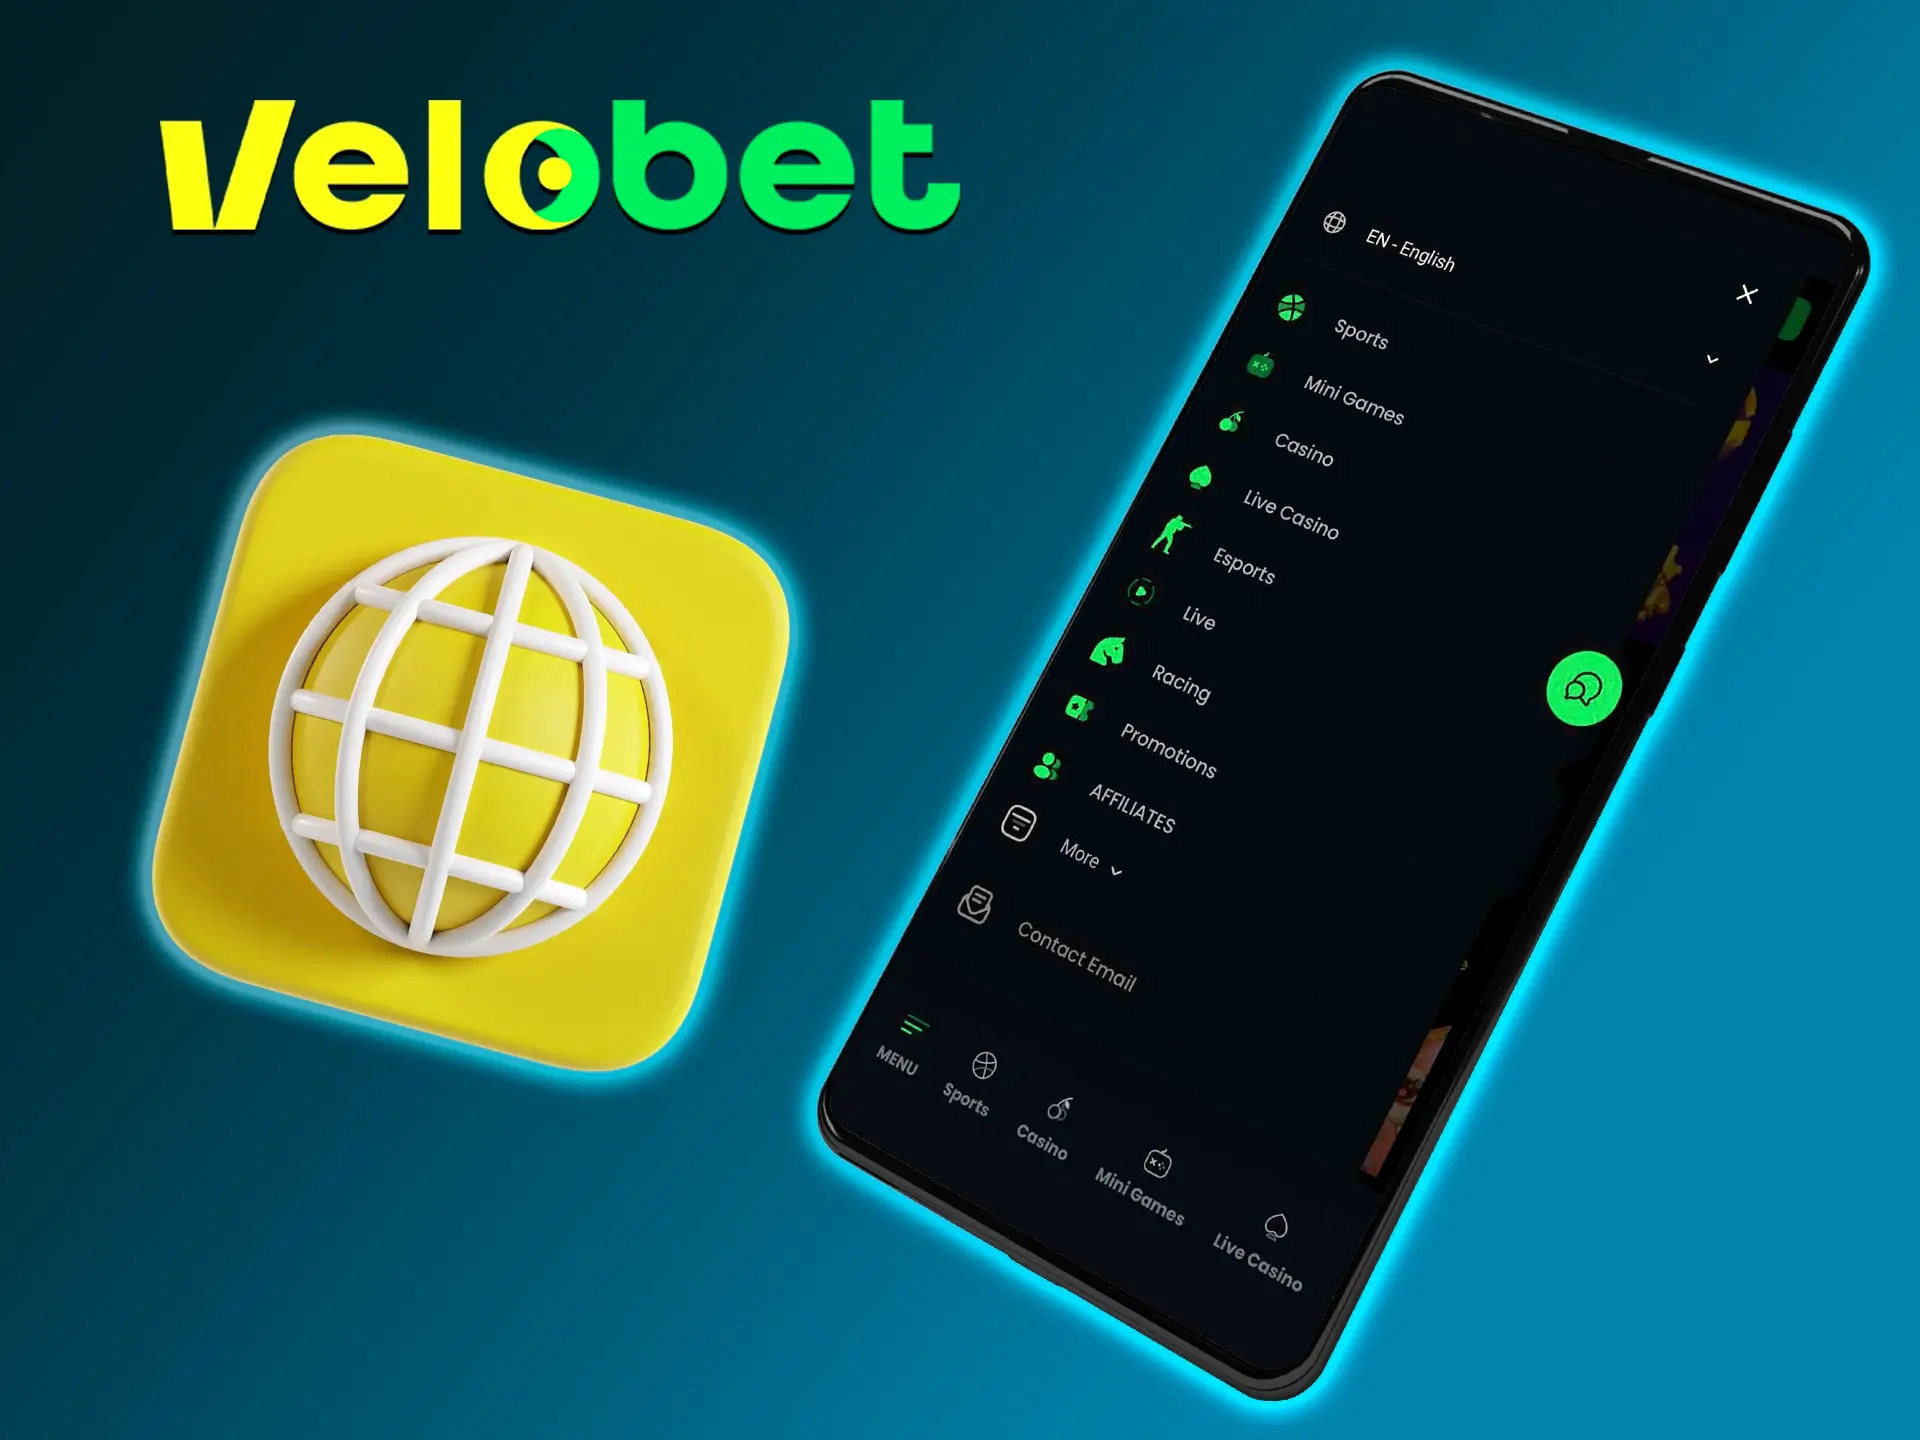 On the mobile site you will find the full functionality of Velobet Casino.